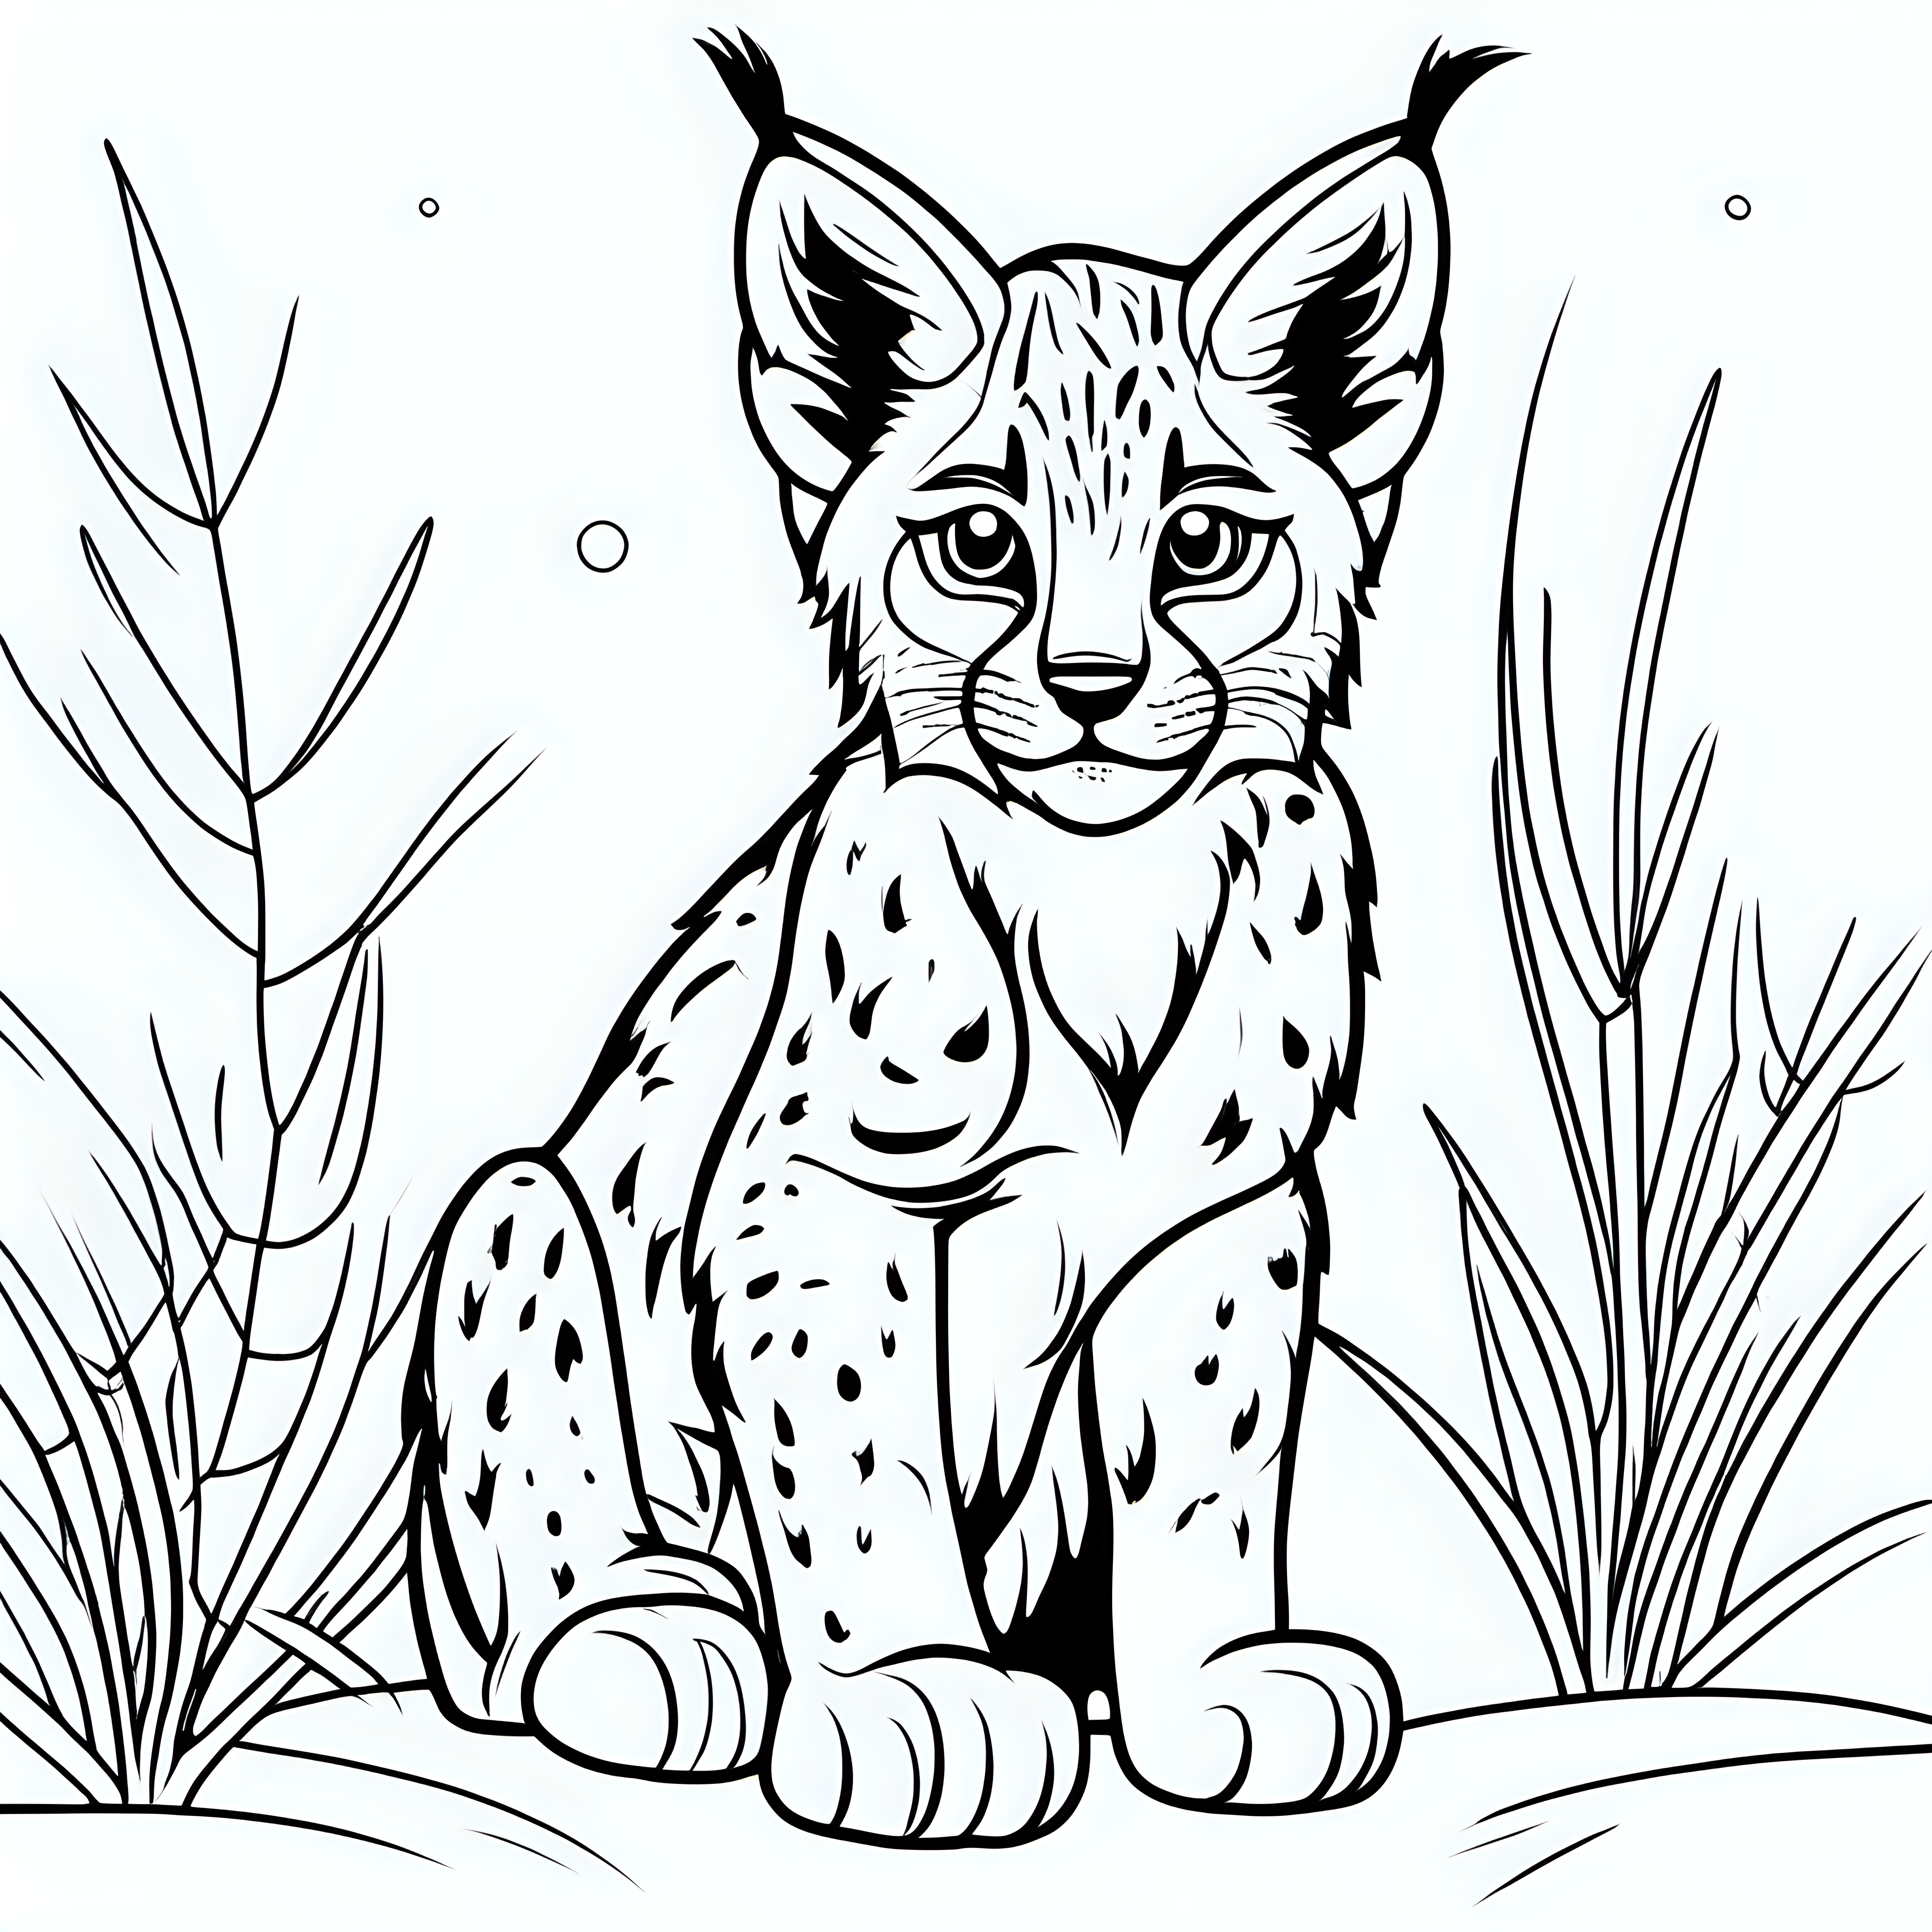 draw a cute baby Lynx, only black outline, for a coloring book for kids